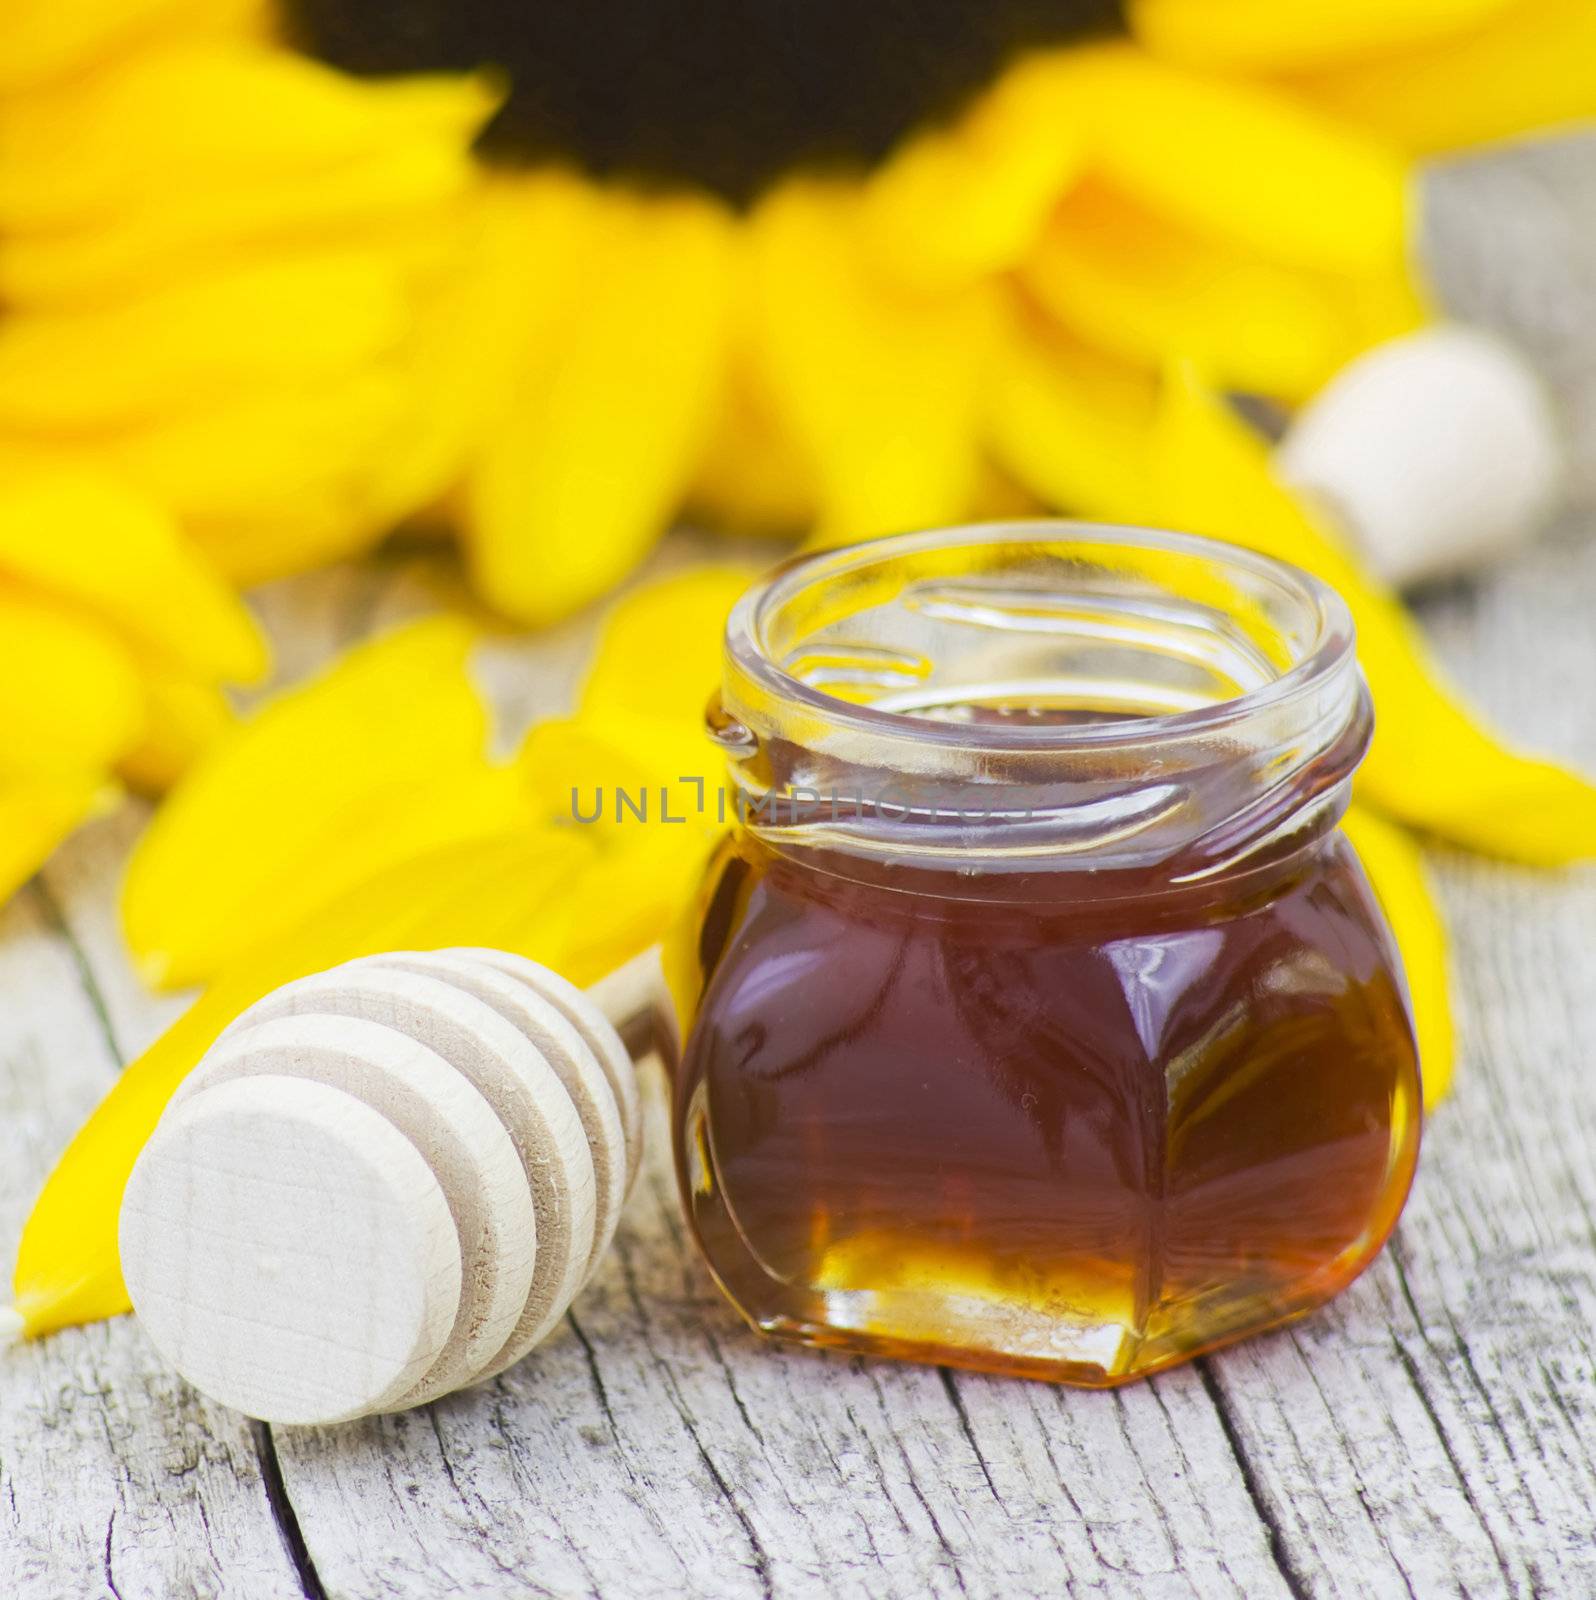 honey and sunflower on old wooden background